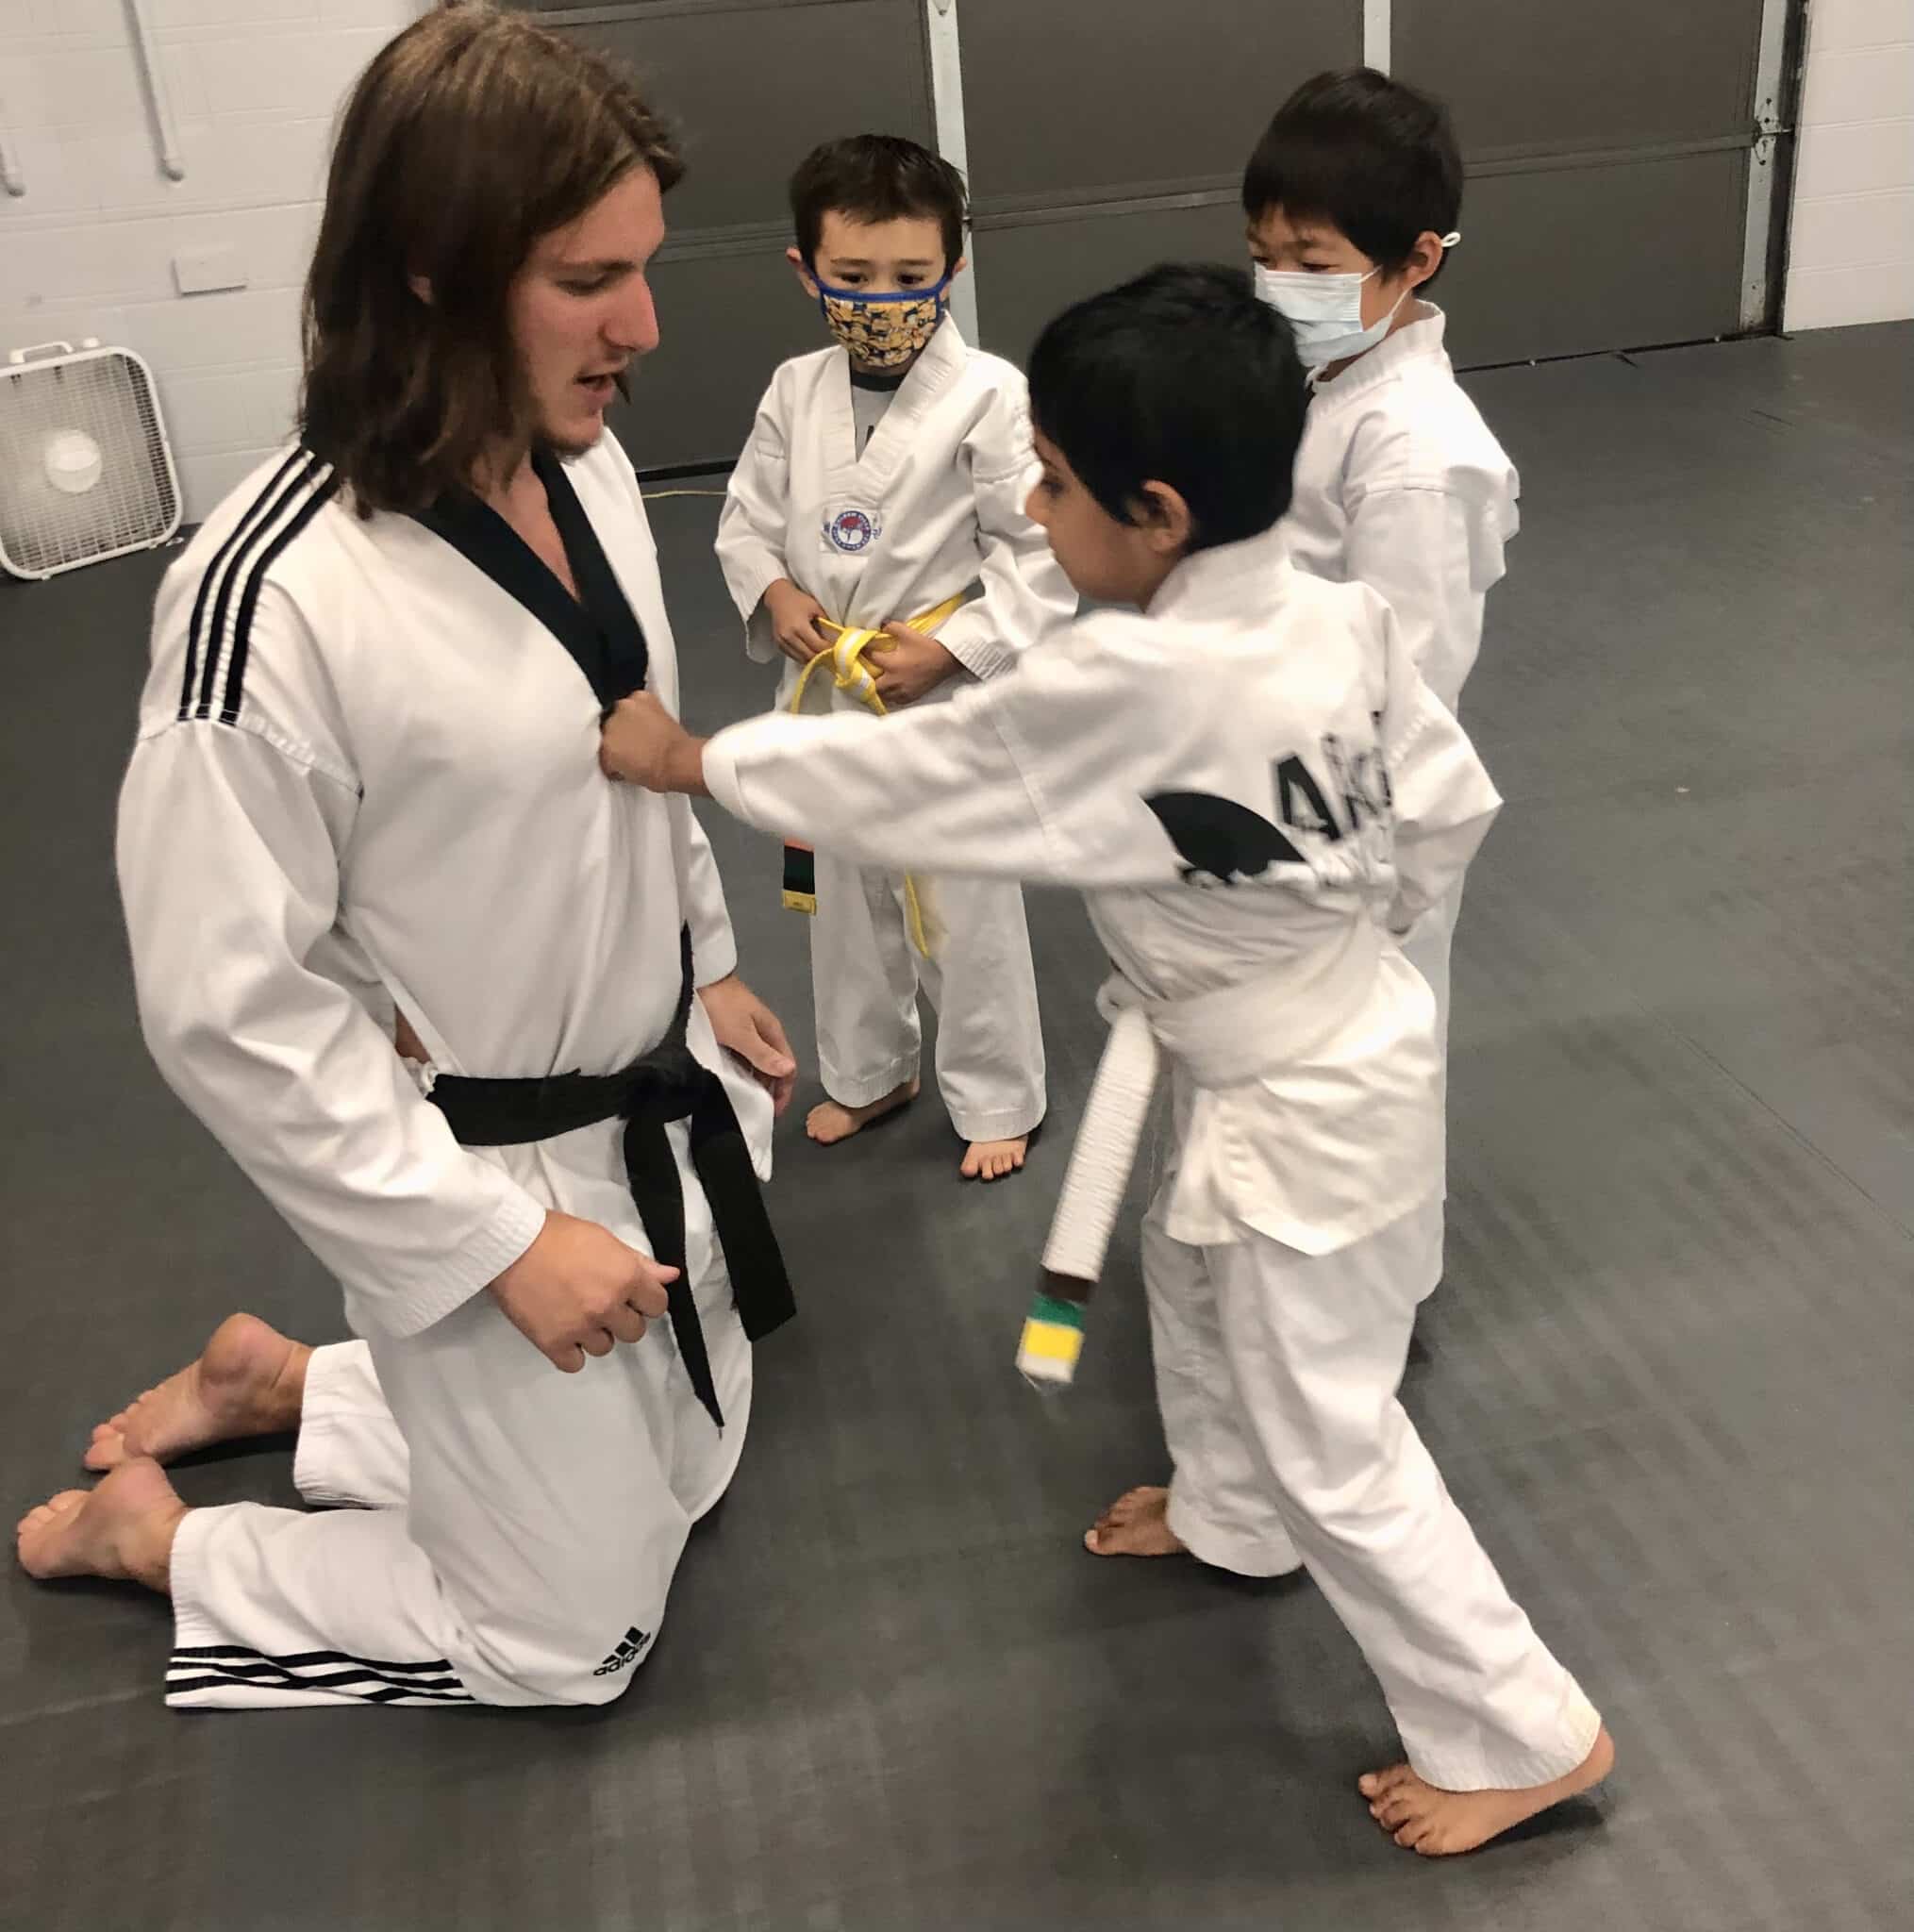 Boy extends his hand in a punch at his Karate teacher's chest while two other boys watch. All are in Taekwondo uniforms from Akula Taekwondo.